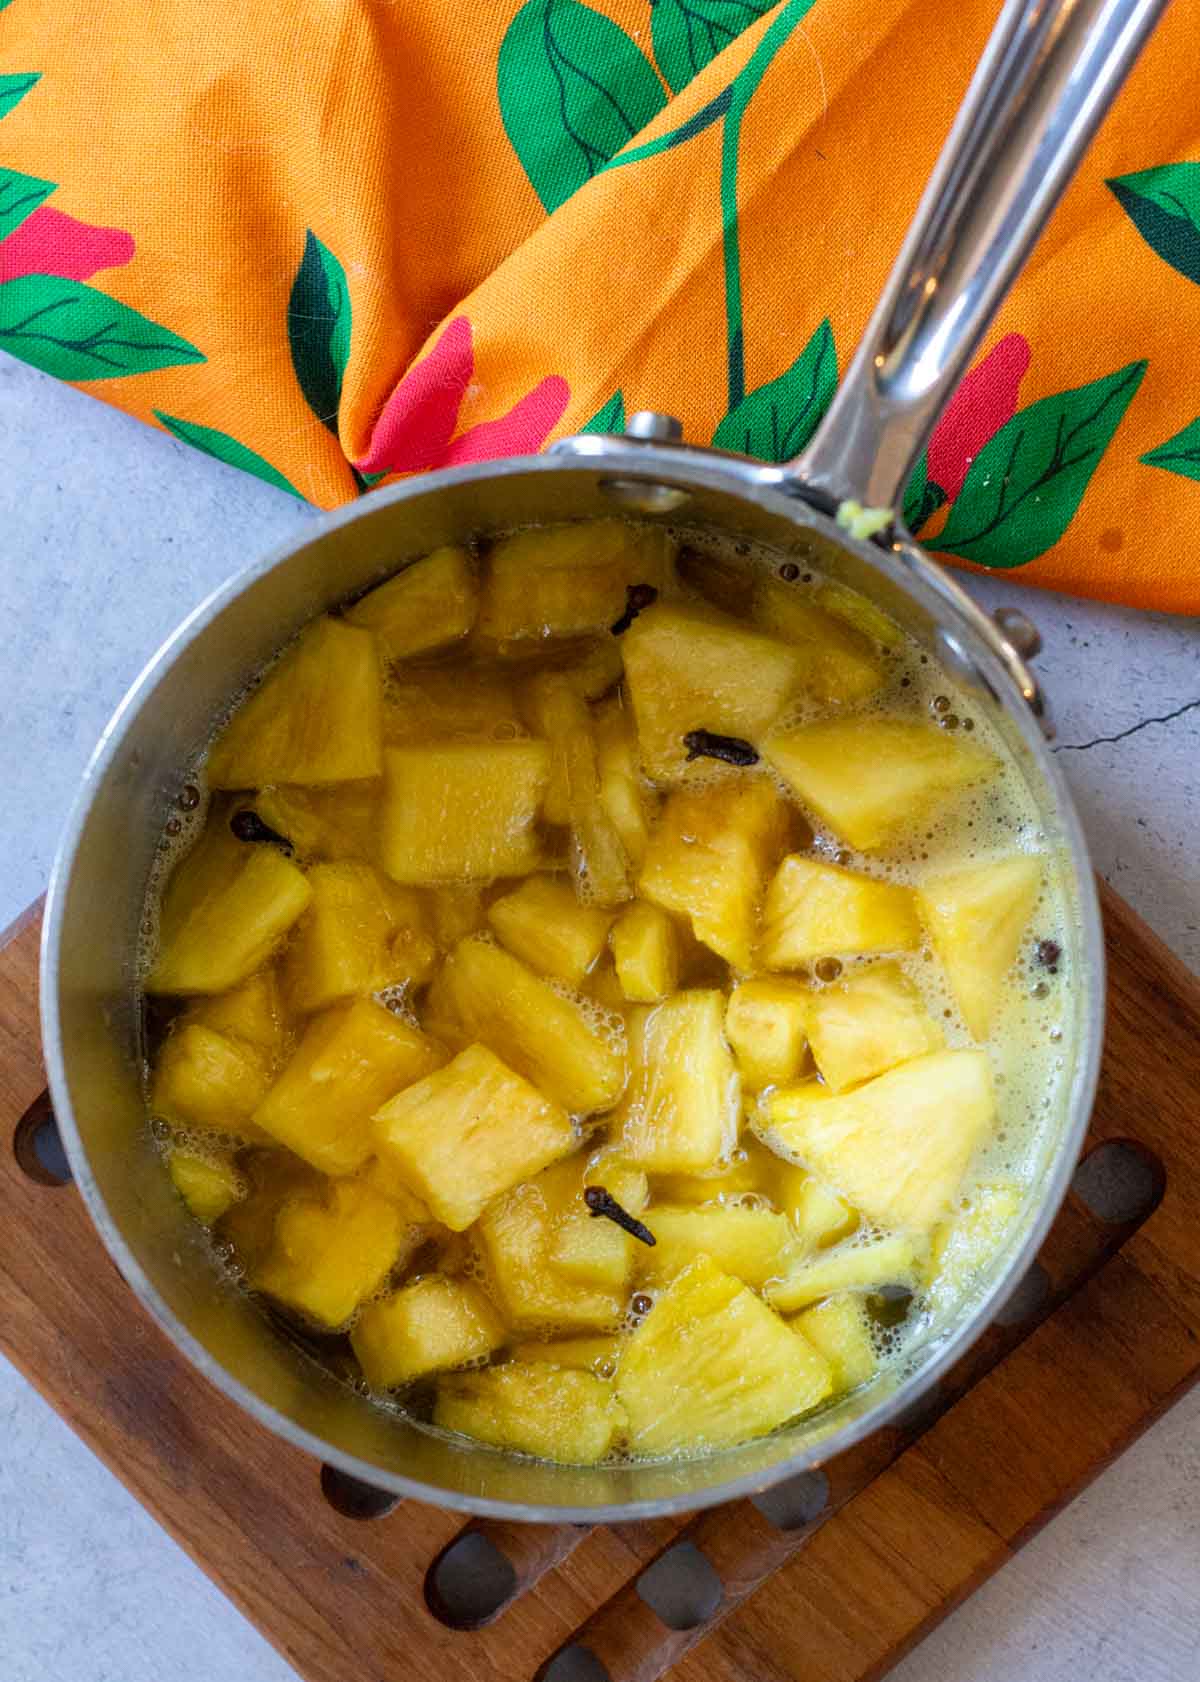 Cooking pineapple chunks in pickled pineapple syrup solution.